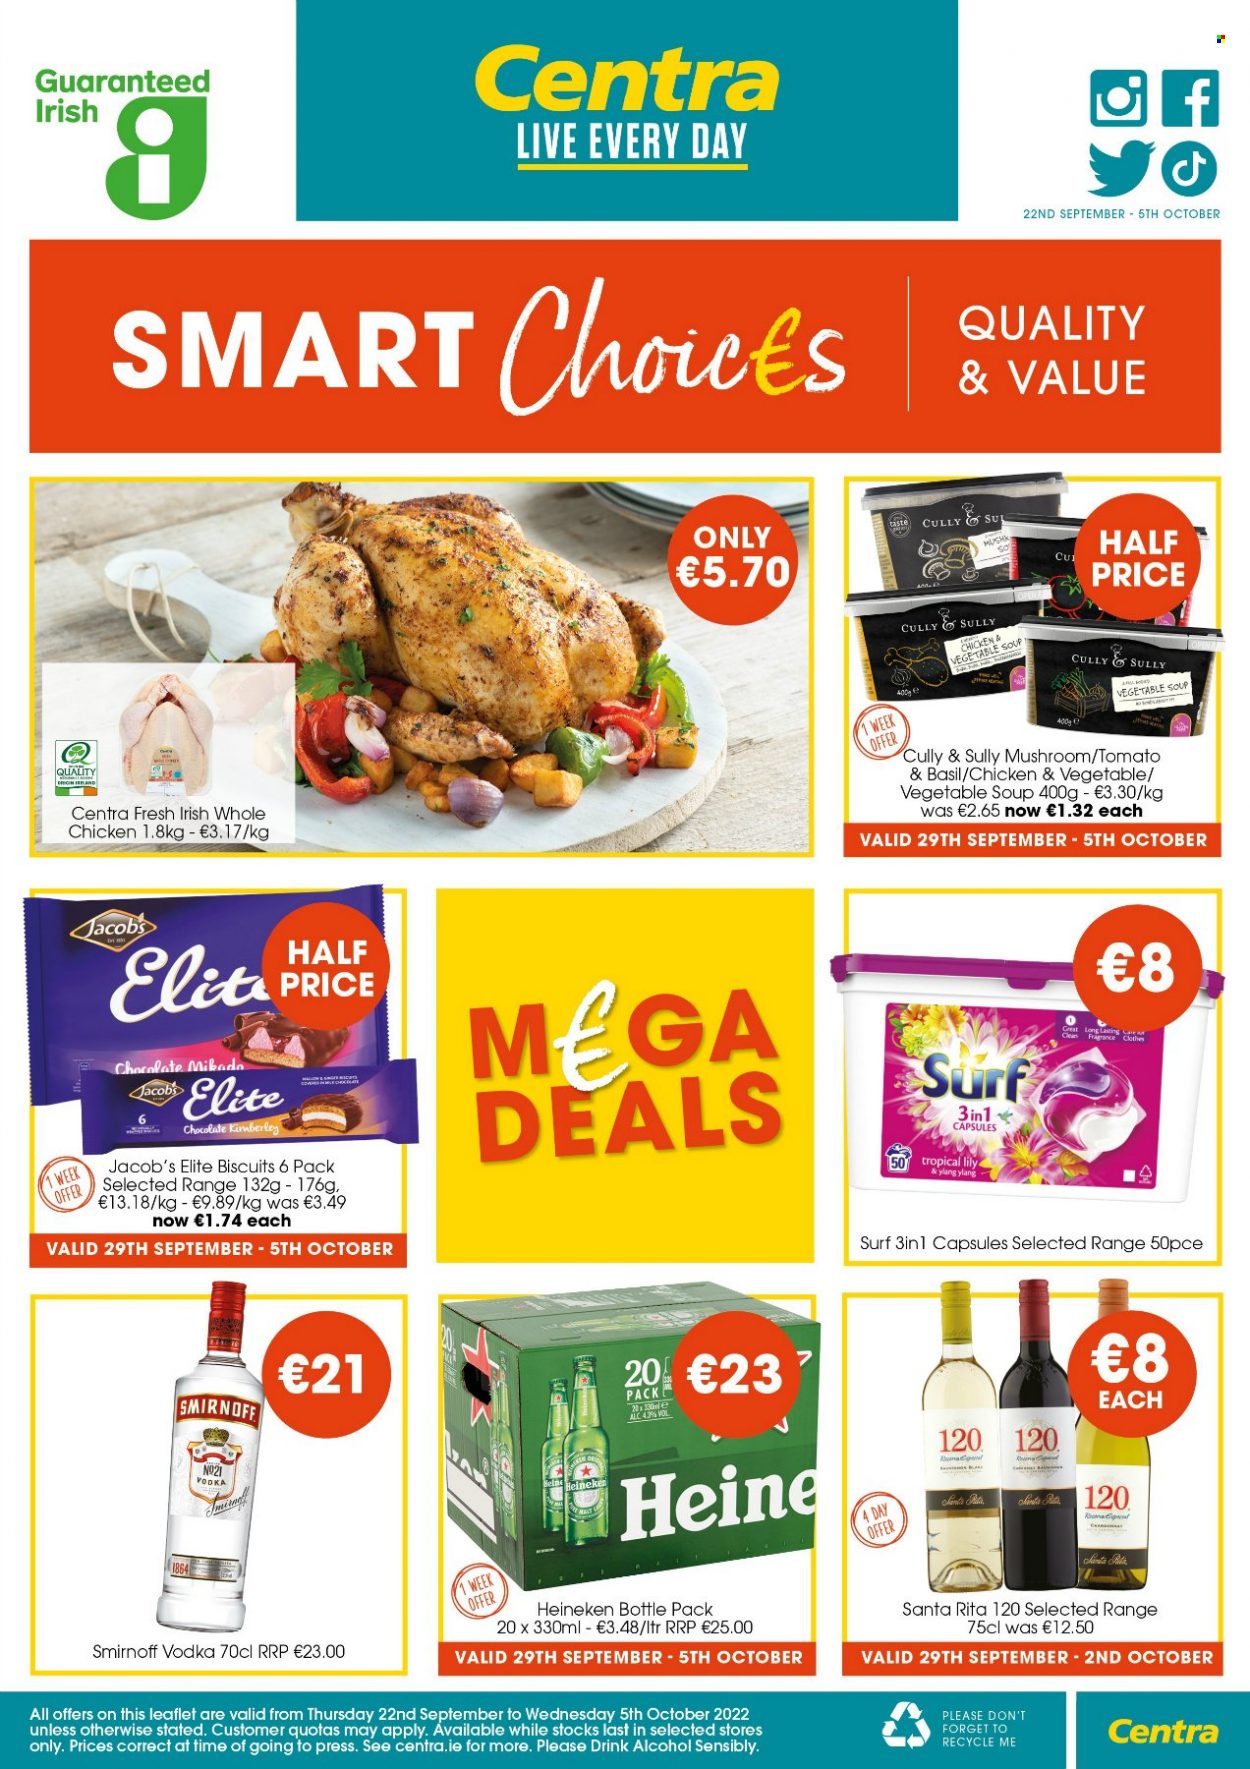 thumbnail - Centra offer  - 22.09.2022 - 05.10.2022 - Sales products - mushrooms, vegetable soup, soup, chocolate, biscuit, Jacobs, white wine, Chardonnay, wine, alcohol, Smirnoff, vodka, beer, Heineken, whole chicken, Surf. Page 4.